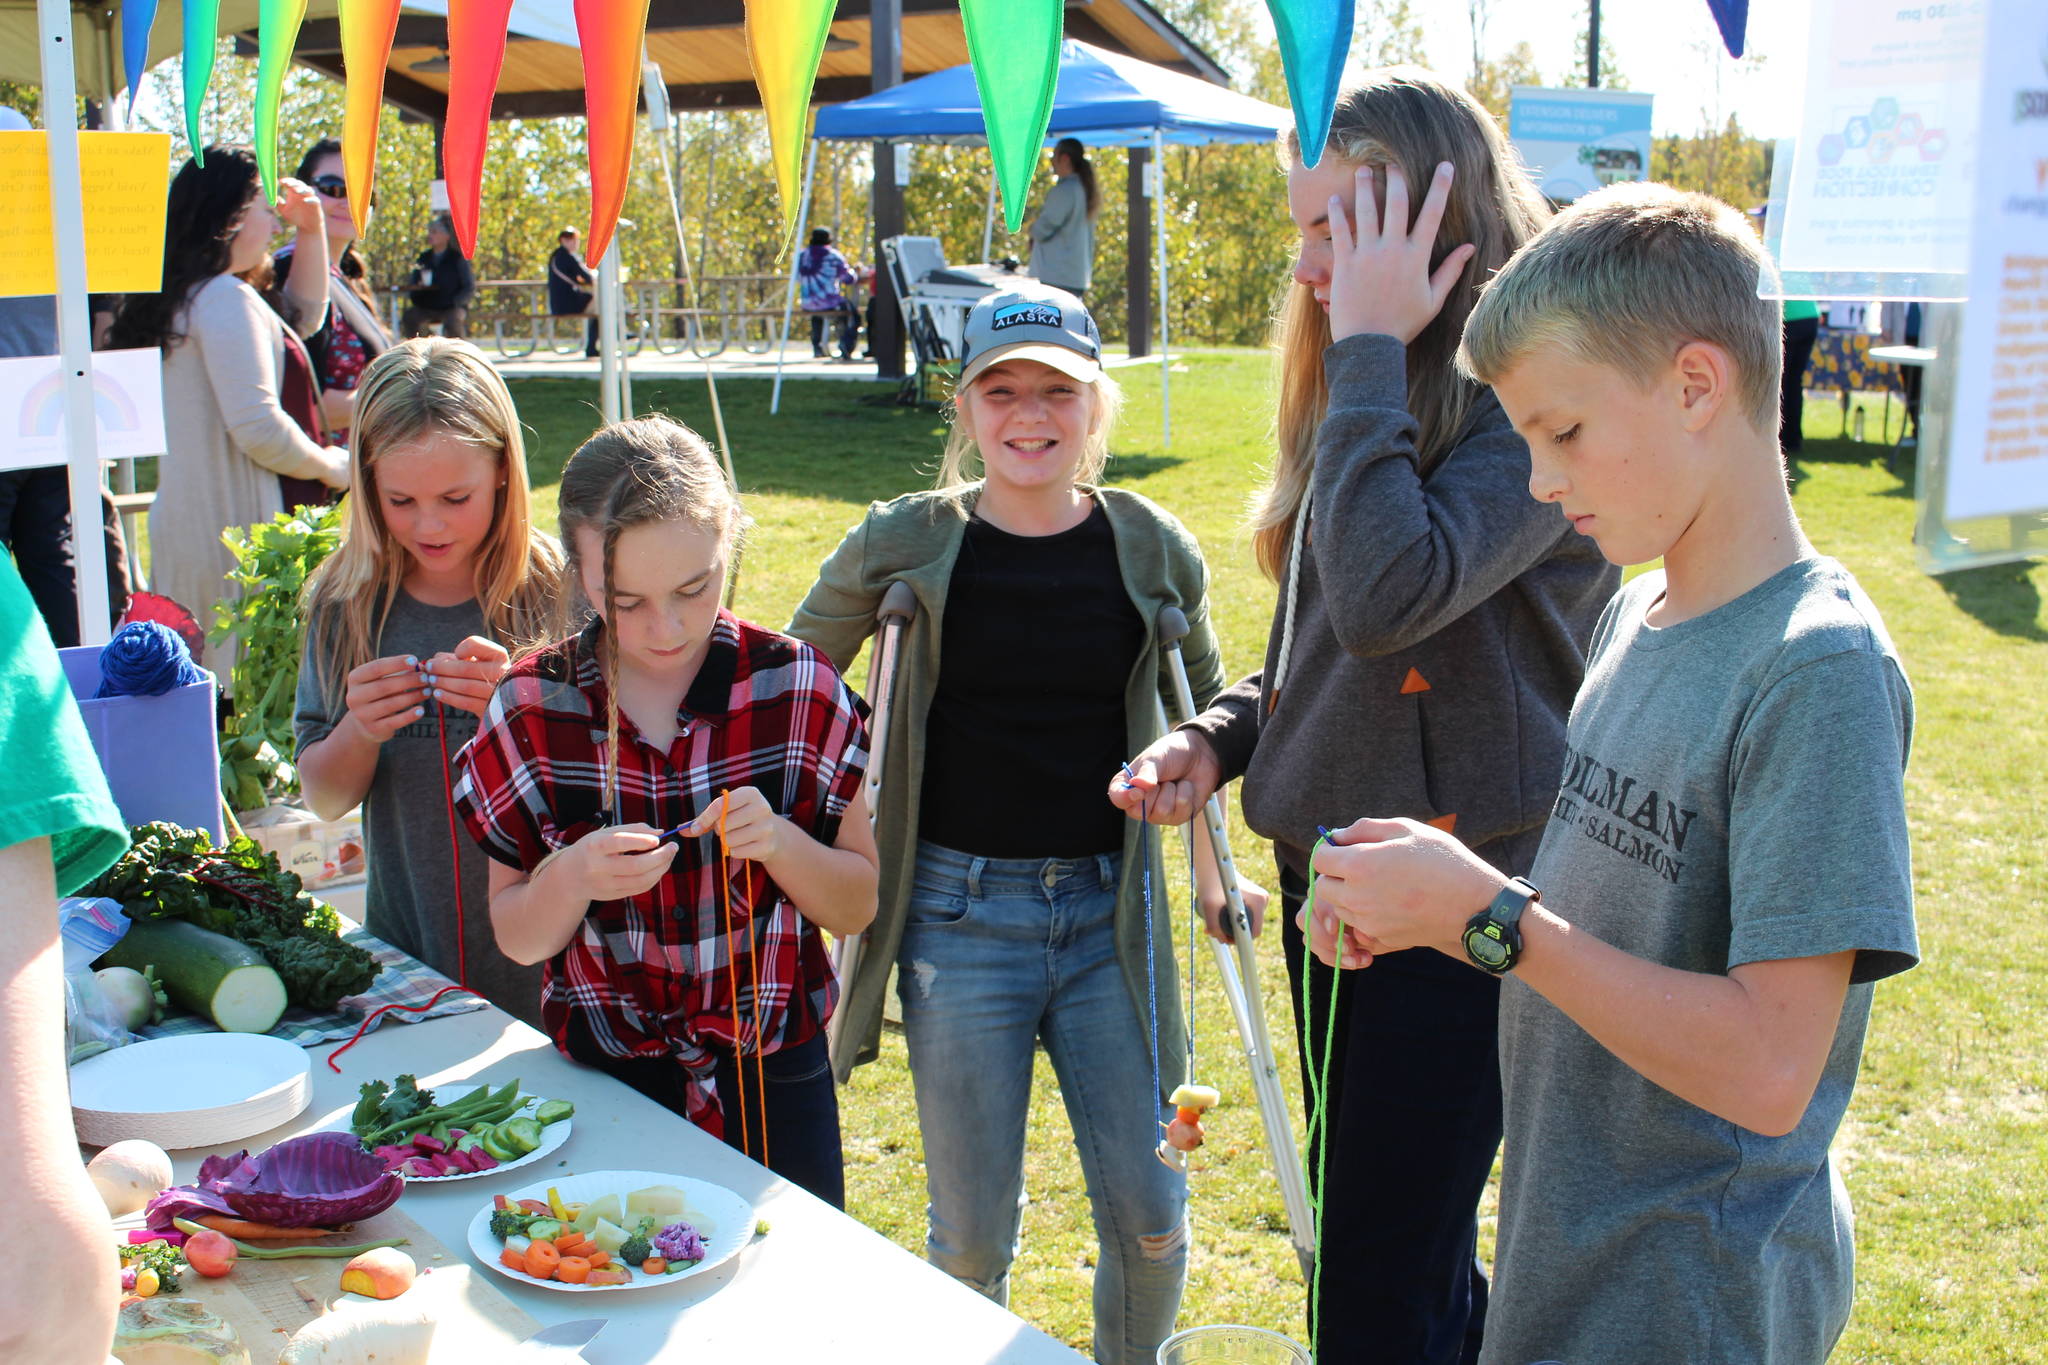 Kids make necklaces out of fresh vegetables at the Harvest Moon Local Food Festival at Soldotna Creek Park on Sept. 14, 2019. (Photo by Brian Mazurek/Peninsula Clarion)